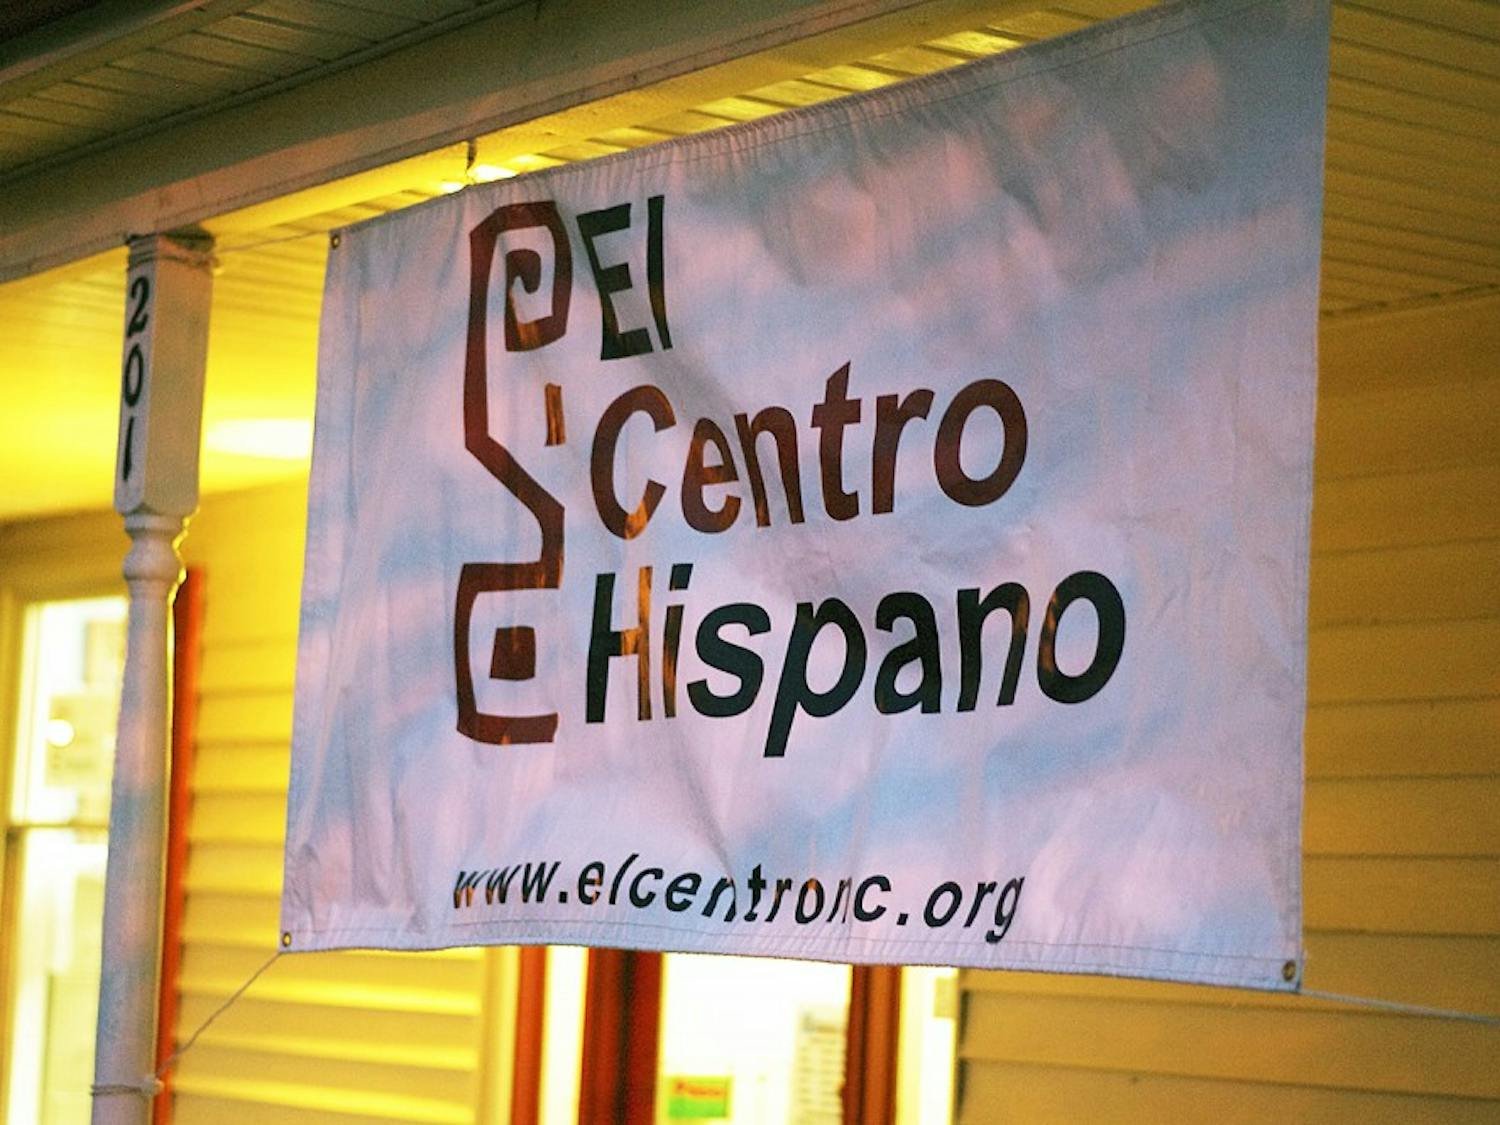 El Centro Hispano also has a location on W Weaver Street in Carrboro, which opened in 2015.